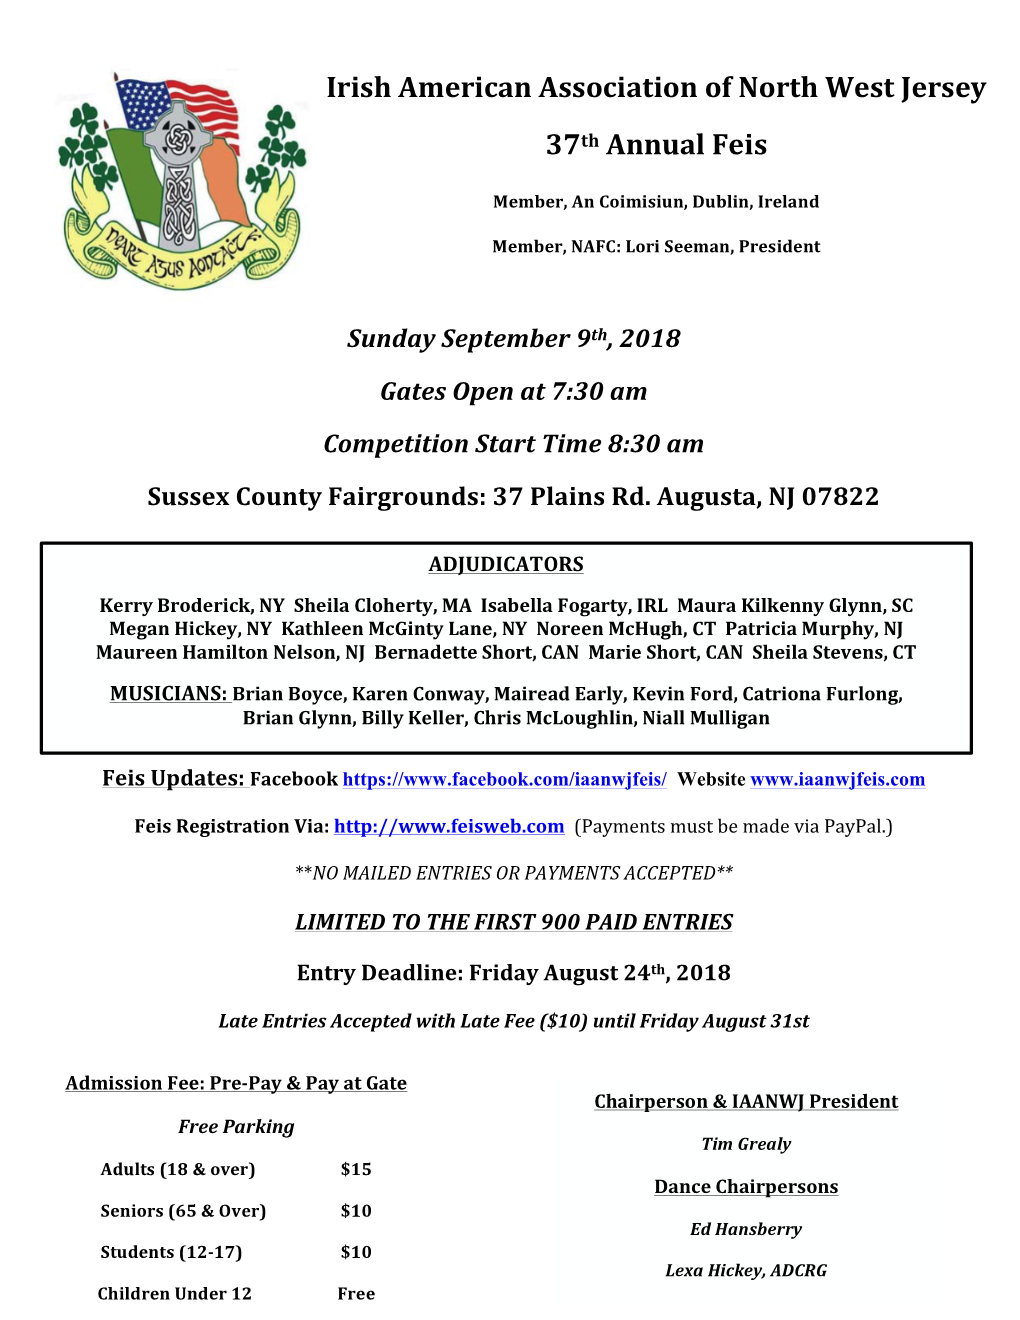 Irish American Association of North West Jersey 37Th Annual Feis